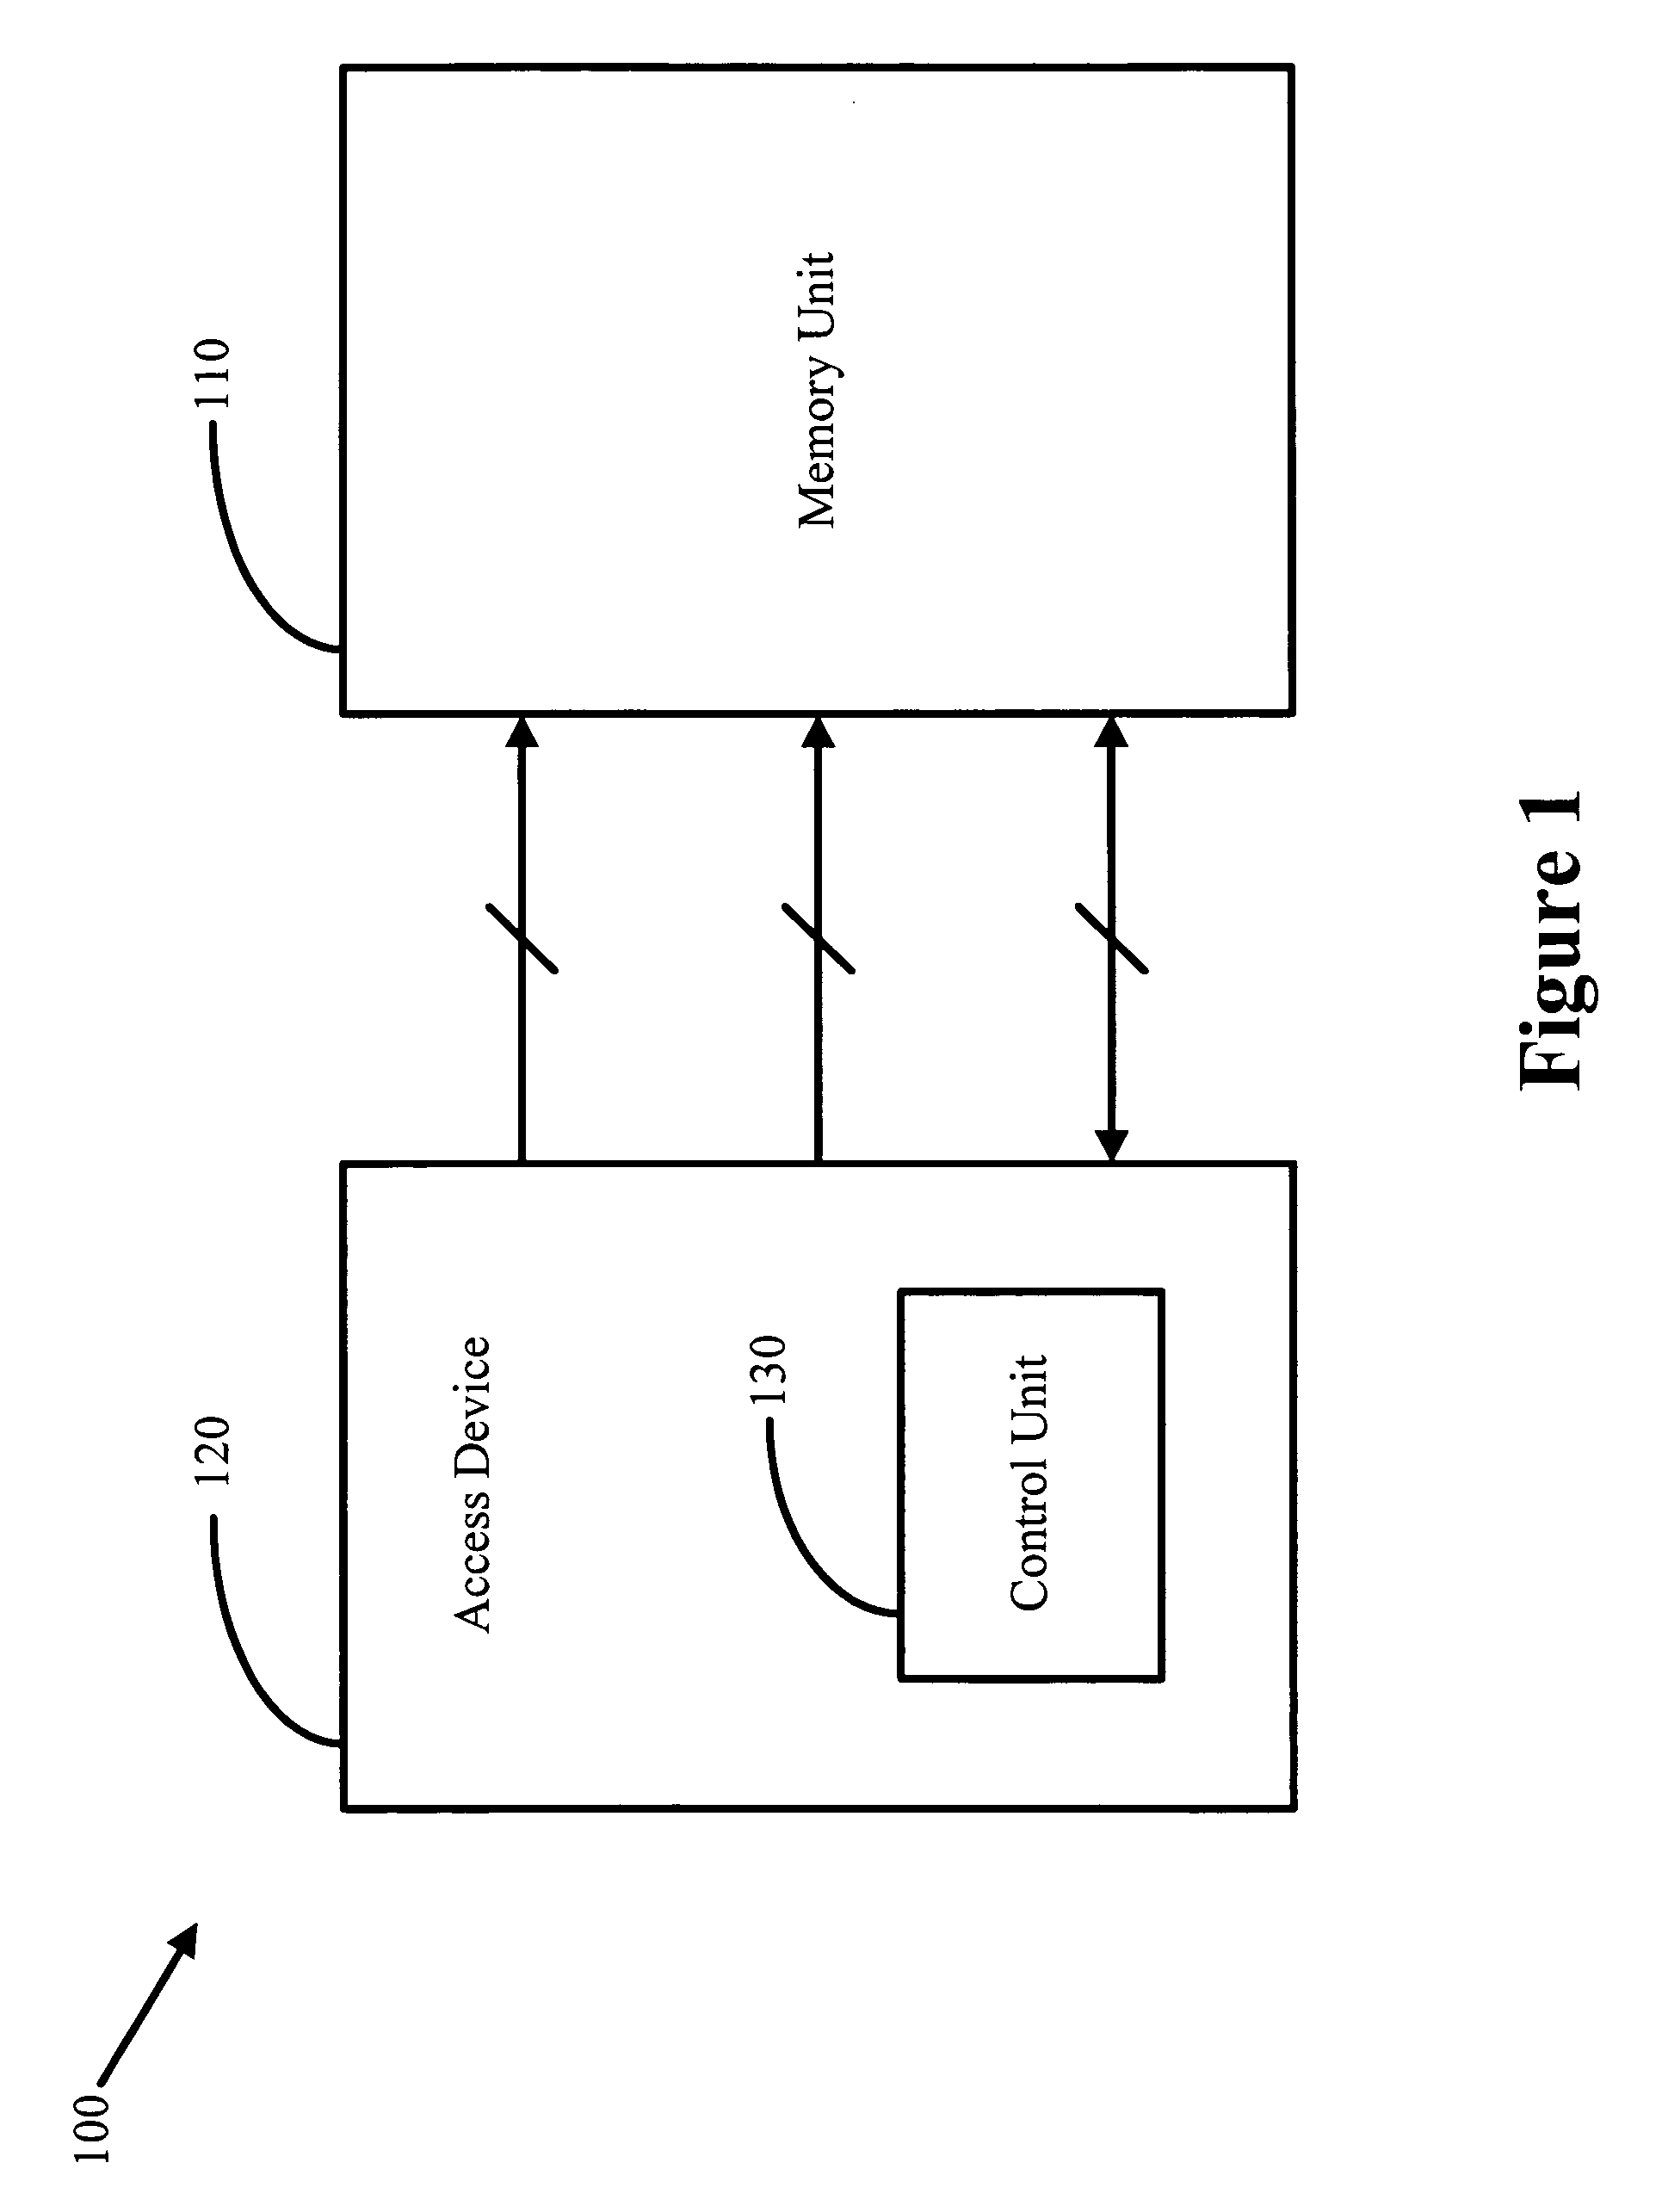 Method and apparatus for controlling refresh operations in a dynamic memory device